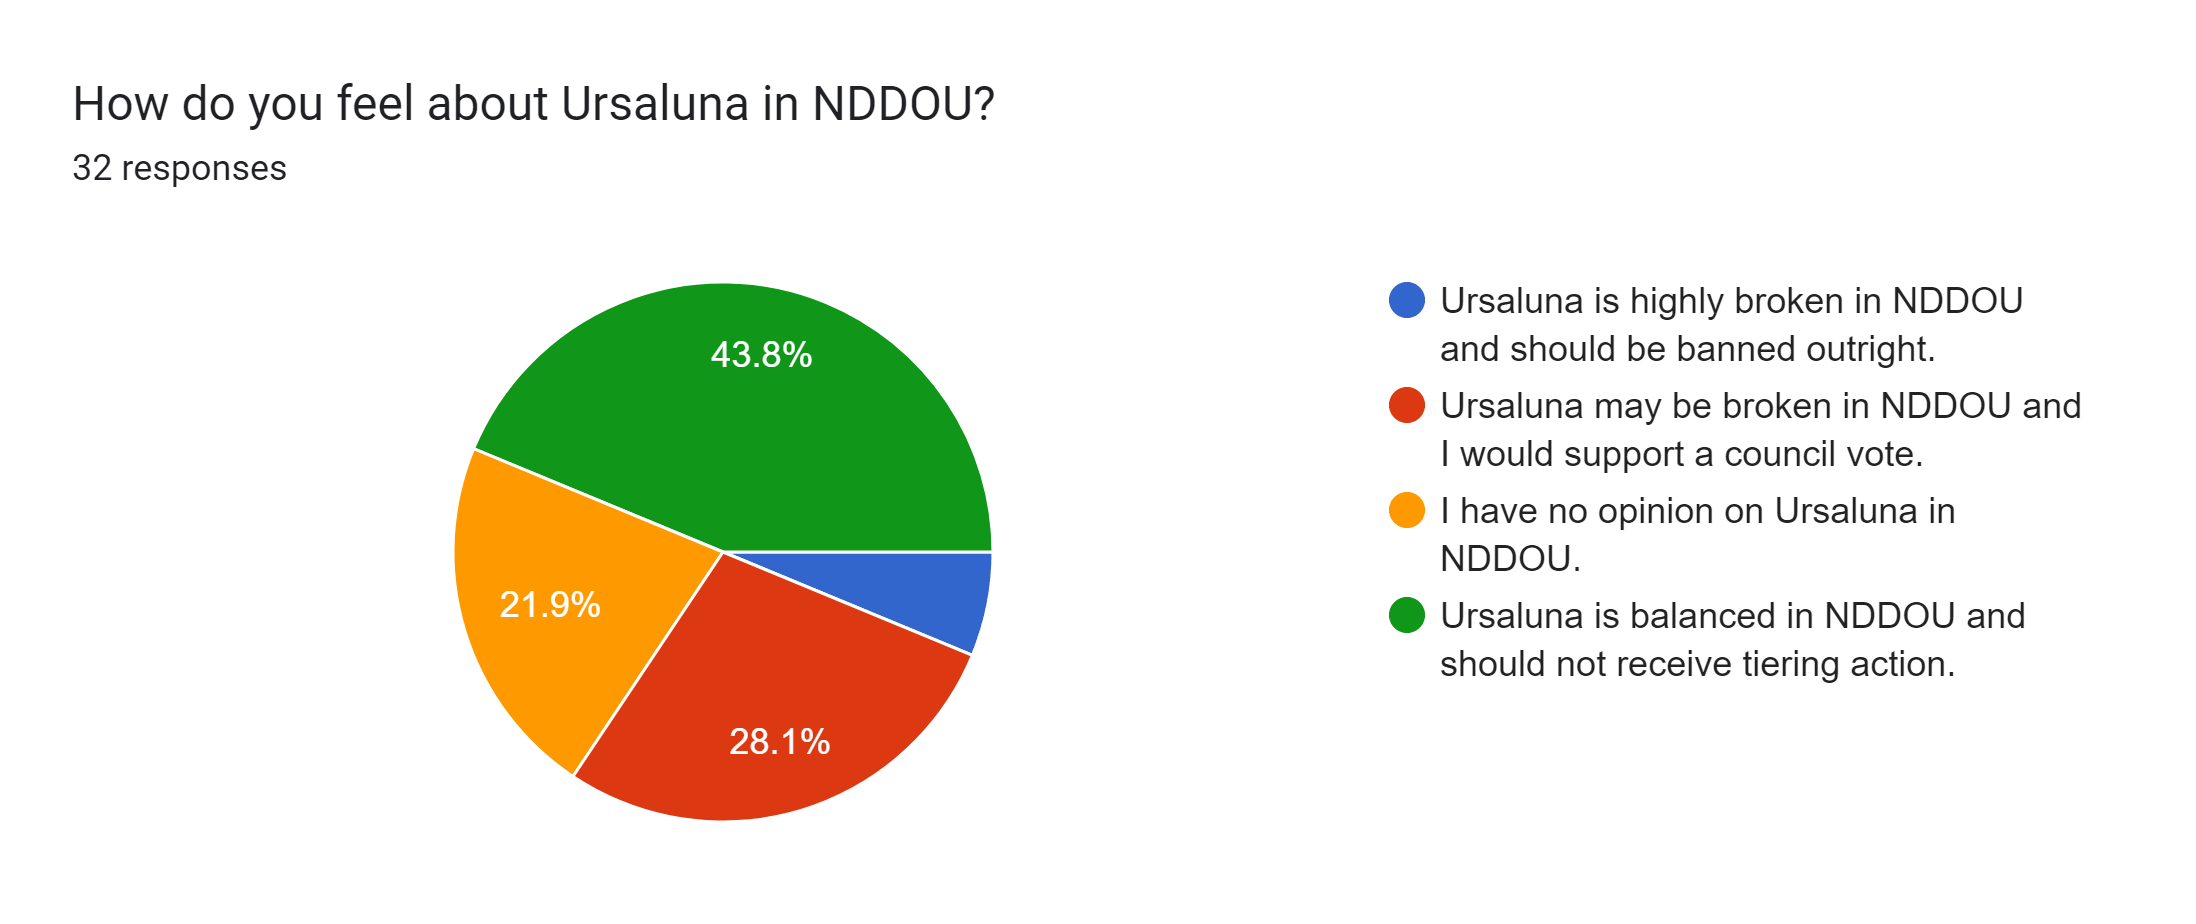 Forms response chart. Question title: How do you feel about Ursaluna in NDDOU?. Number of responses: 32 responses.